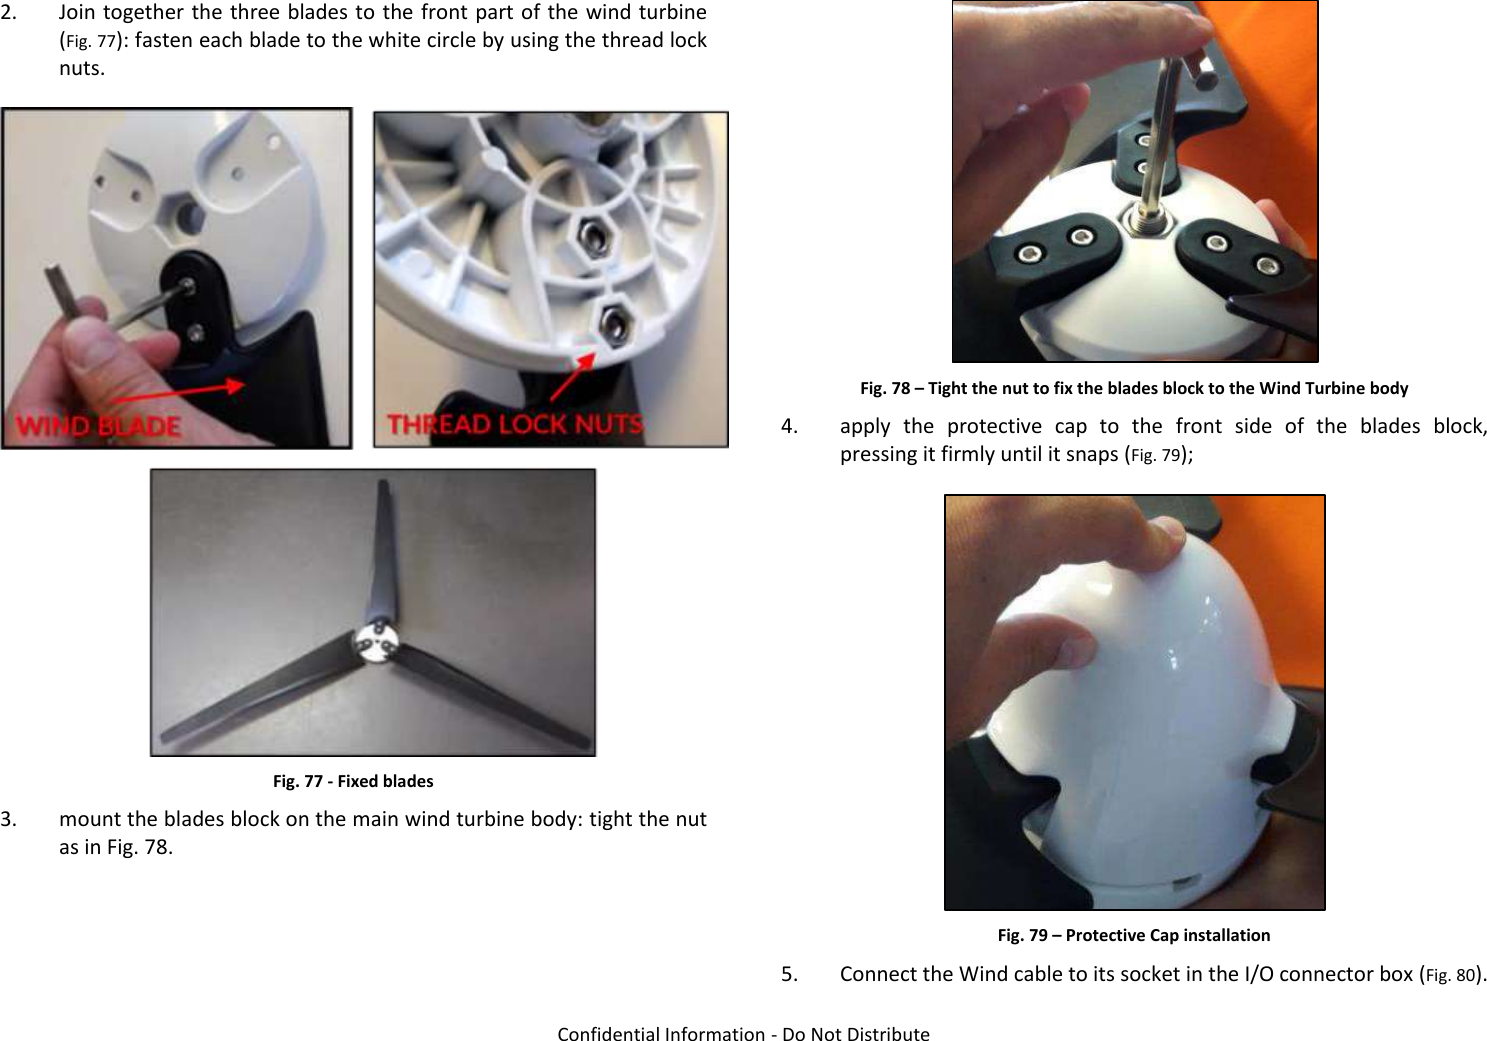   Confidential Information - Do Not Distribute 2. Join together the three blades to the front part of the wind turbine (Fig. 77): fasten each blade to the white circle by using the thread lock nuts.  Fig. 77 - Fixed blades 3. mount the blades block on the main wind turbine body: tight the nut as in Fig. 78.  Fig. 78 – Tight the nut to fix the blades block to the Wind Turbine body 4. apply  the  protective  cap  to  the  front  side  of  the  blades  block, pressing it firmly until it snaps (Fig. 79);  Fig. 79 – Protective Cap installation 5. Connect the Wind cable to its socket in the I/O connector box (Fig. 80). 